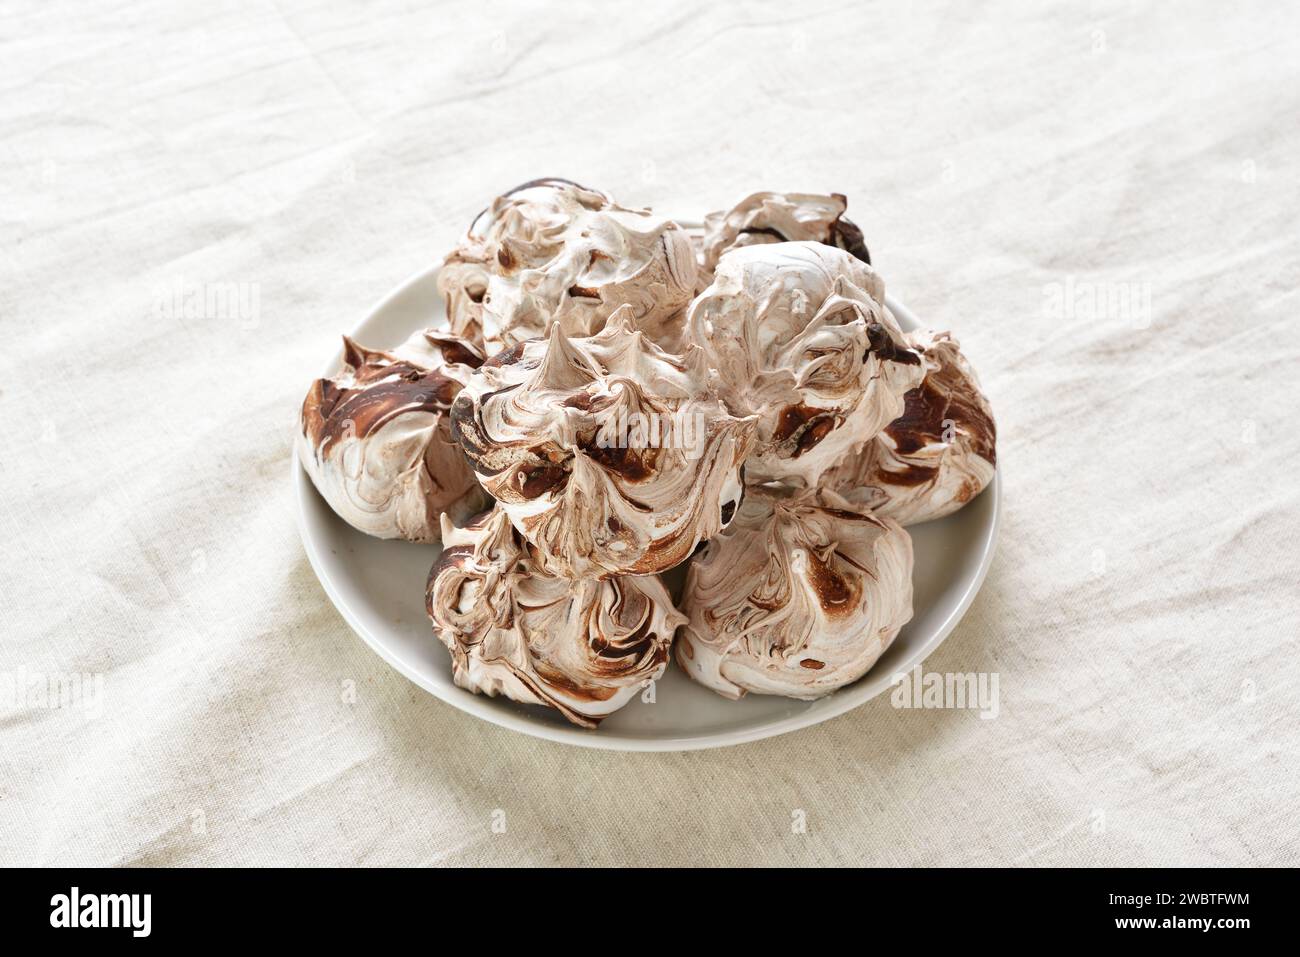 Chocolate meringue cookies on plate over light cloth background. Close up view Stock Photo